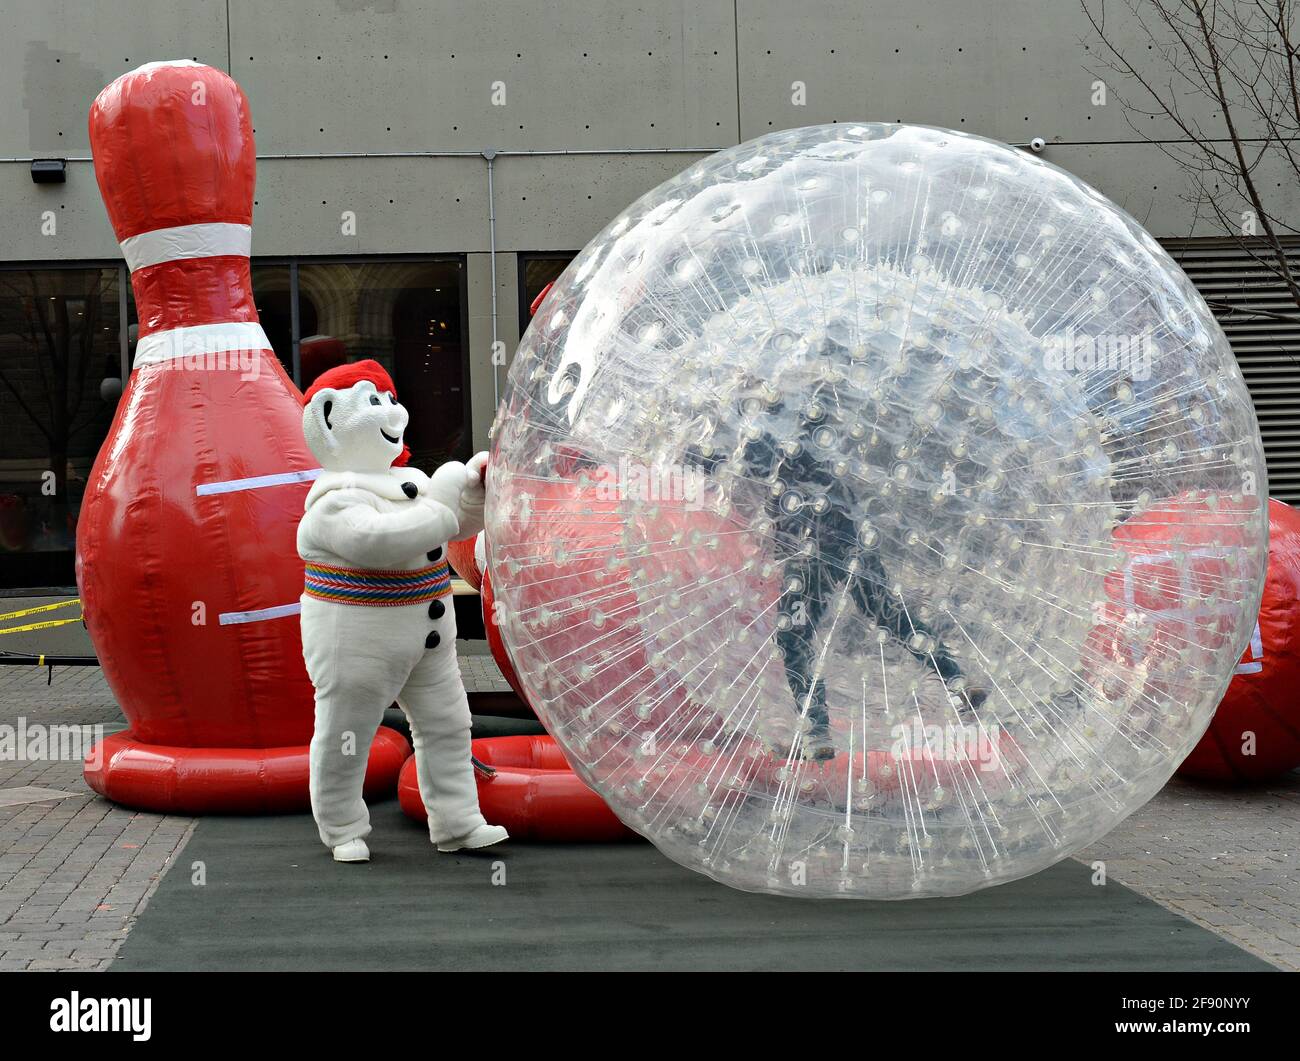 Bonhomme Carnaval plays bowling during his carnival in Quebec city , Canada Stock Photo